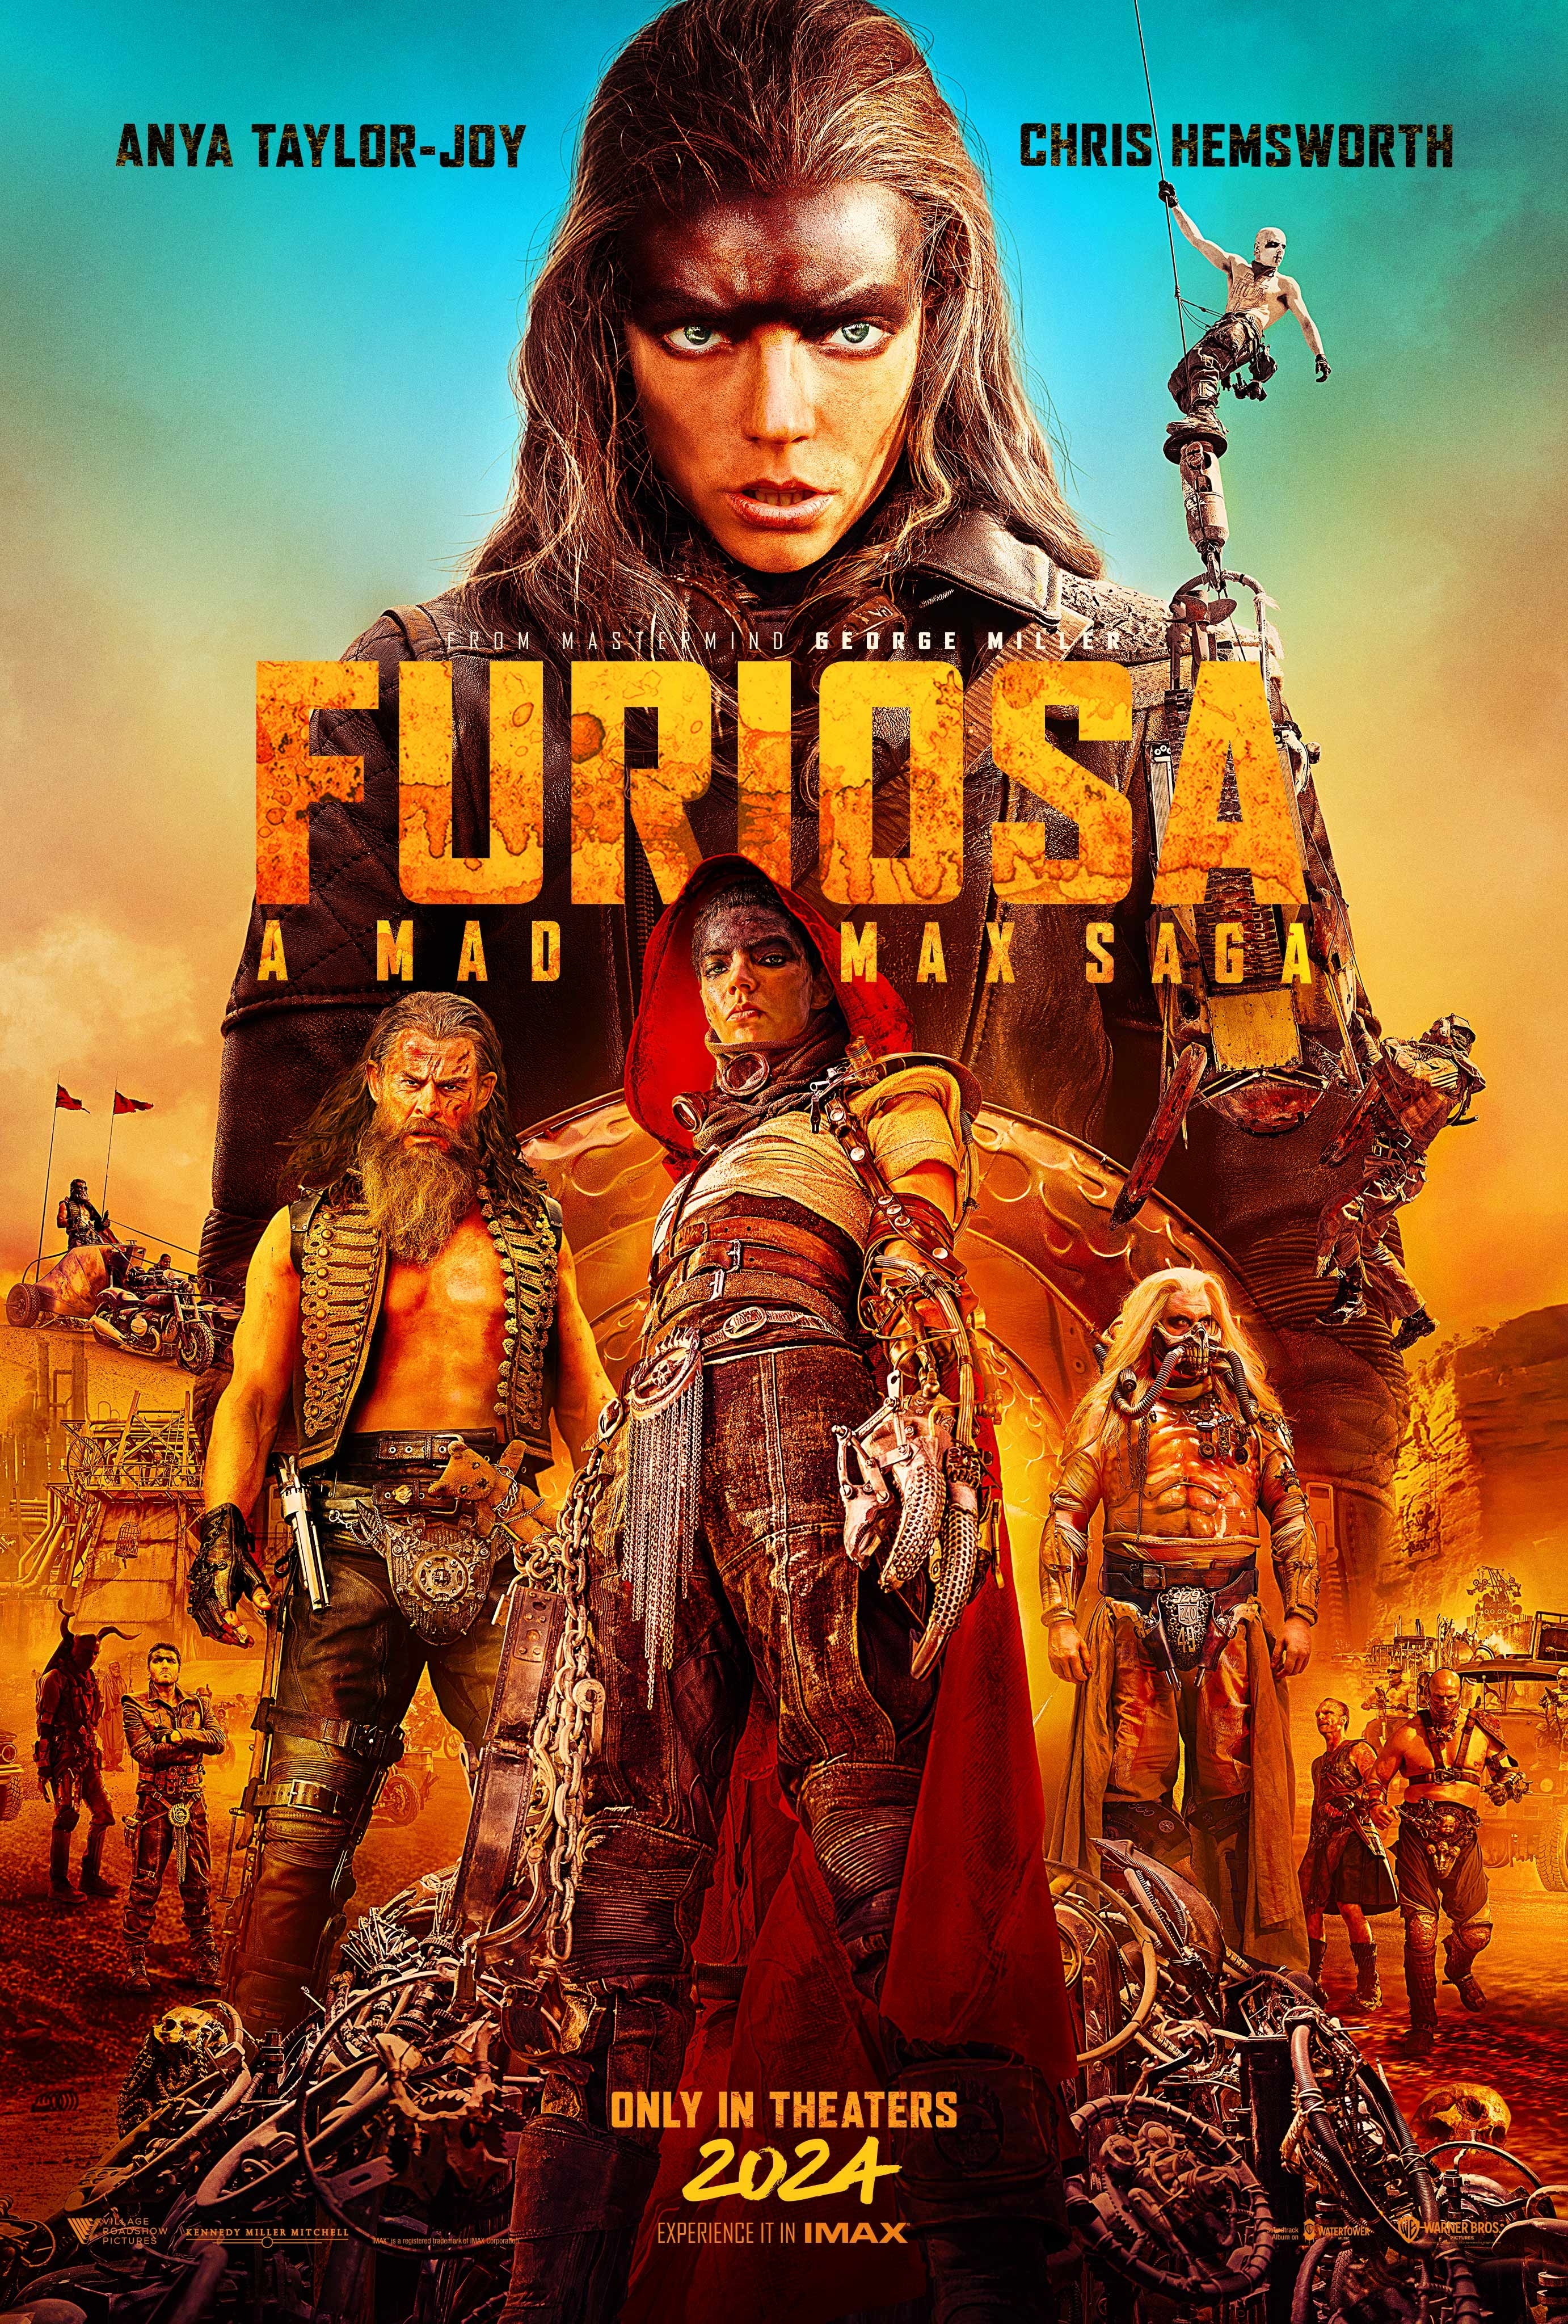 Movie poster for &quot;Furiosa&quot; featuring Anya Taylor-Joy and Chris Hemsworth, with a dystopian backdrop. Coming to theaters in 2024